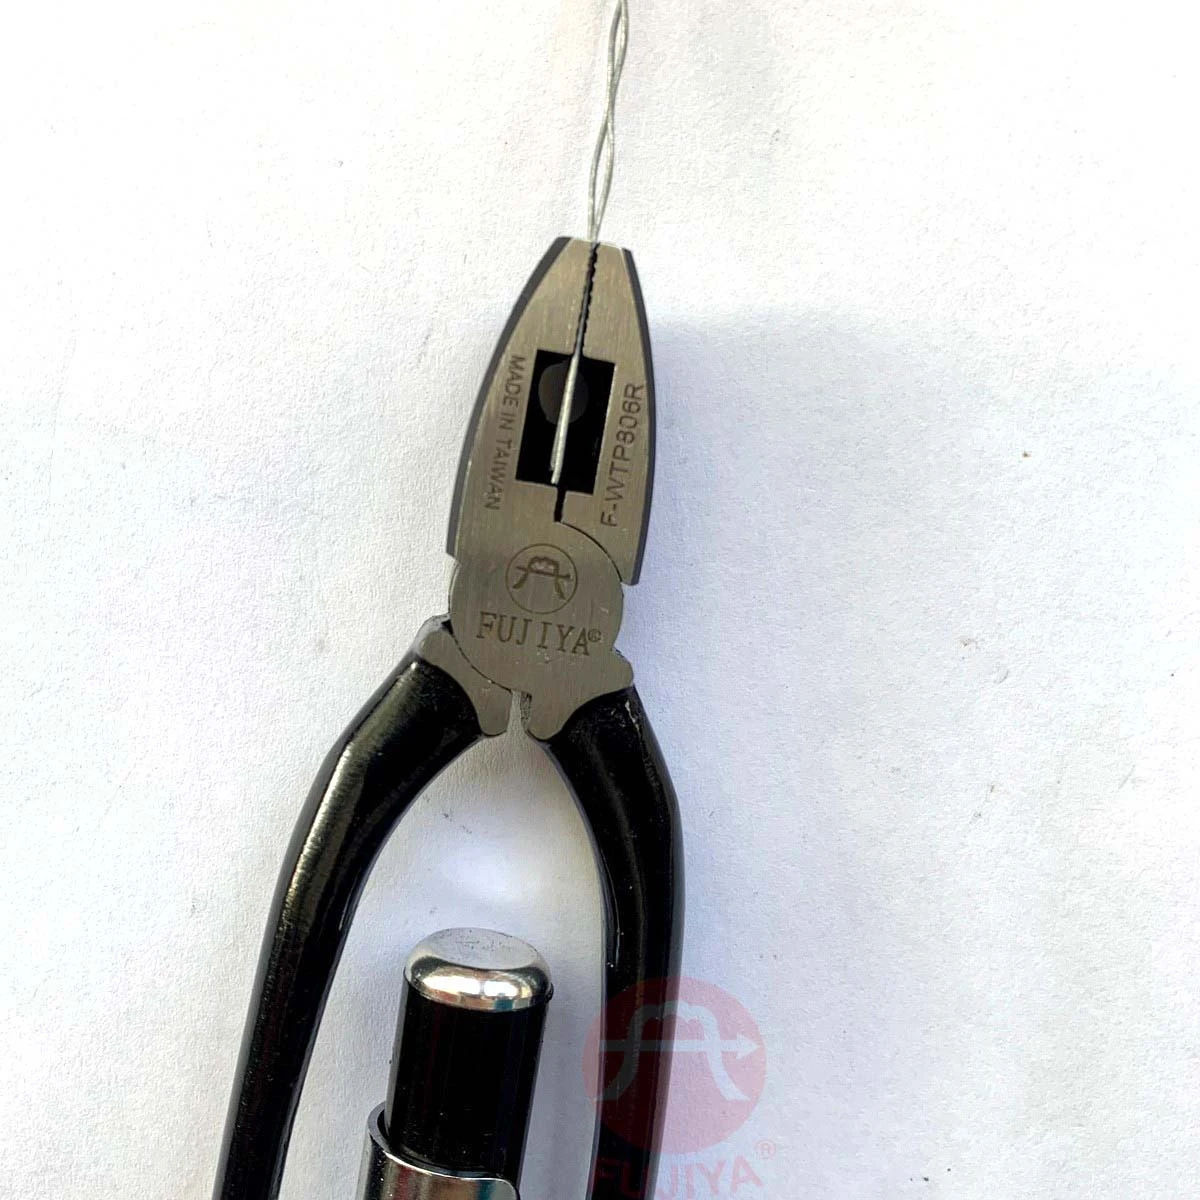 Taiwan Aircraft Locking Tool Reversible Safety Wire Pliers l 6140 CR-V Alloy Steel l Chromed plated alloy steel rotary switch l